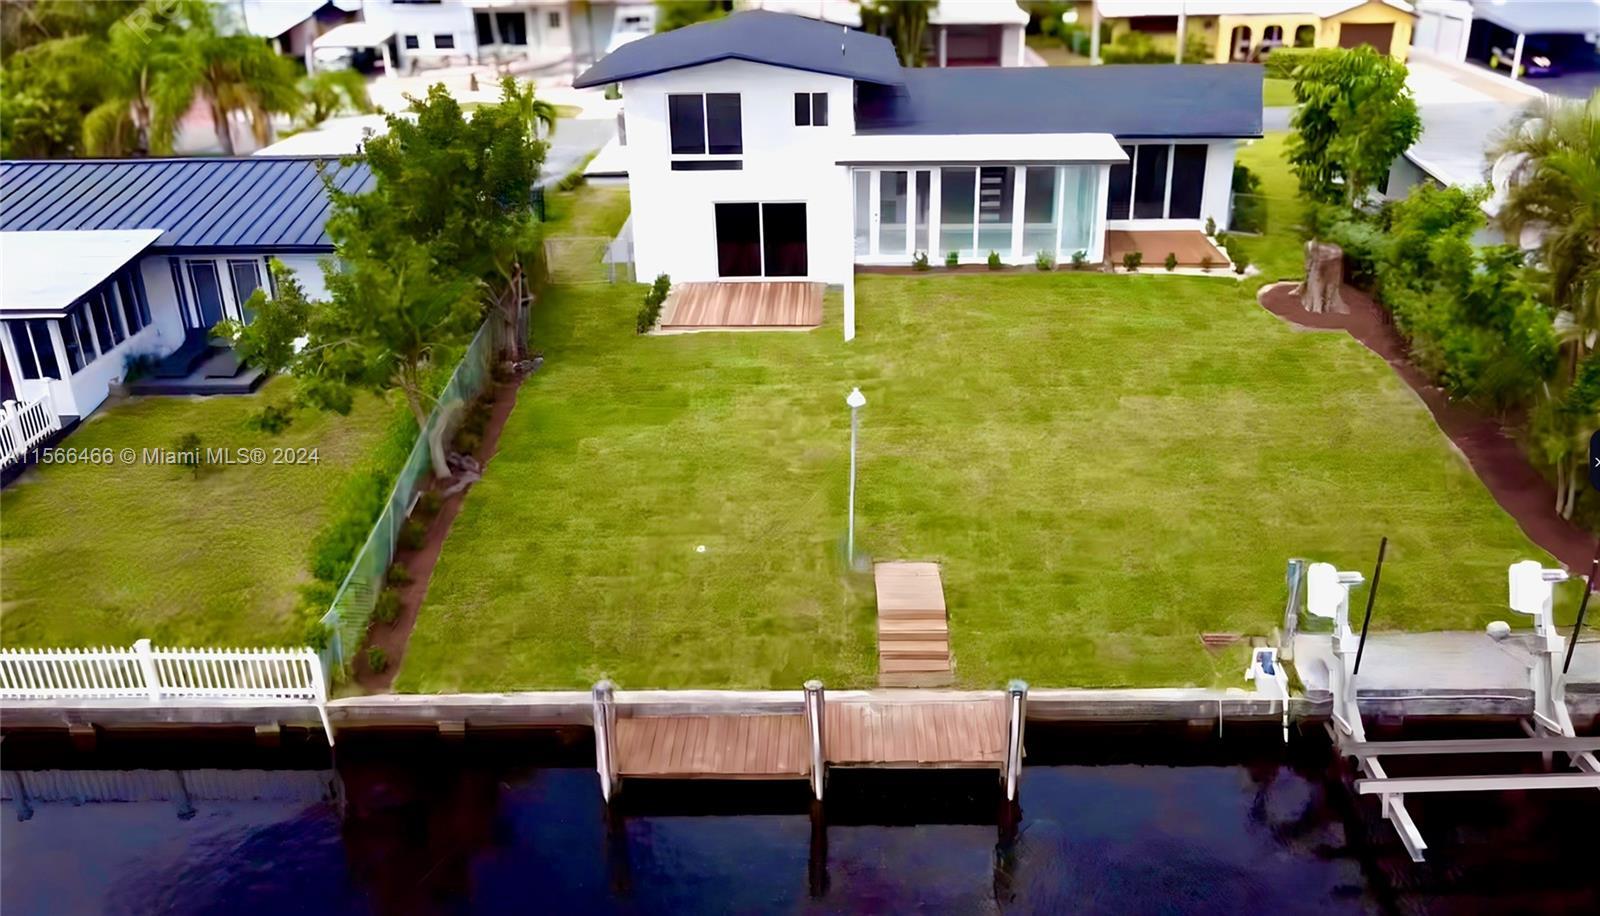 Completely new and remodeled Single Family Home located in prestigious Lauderdale Isles - Waterfront